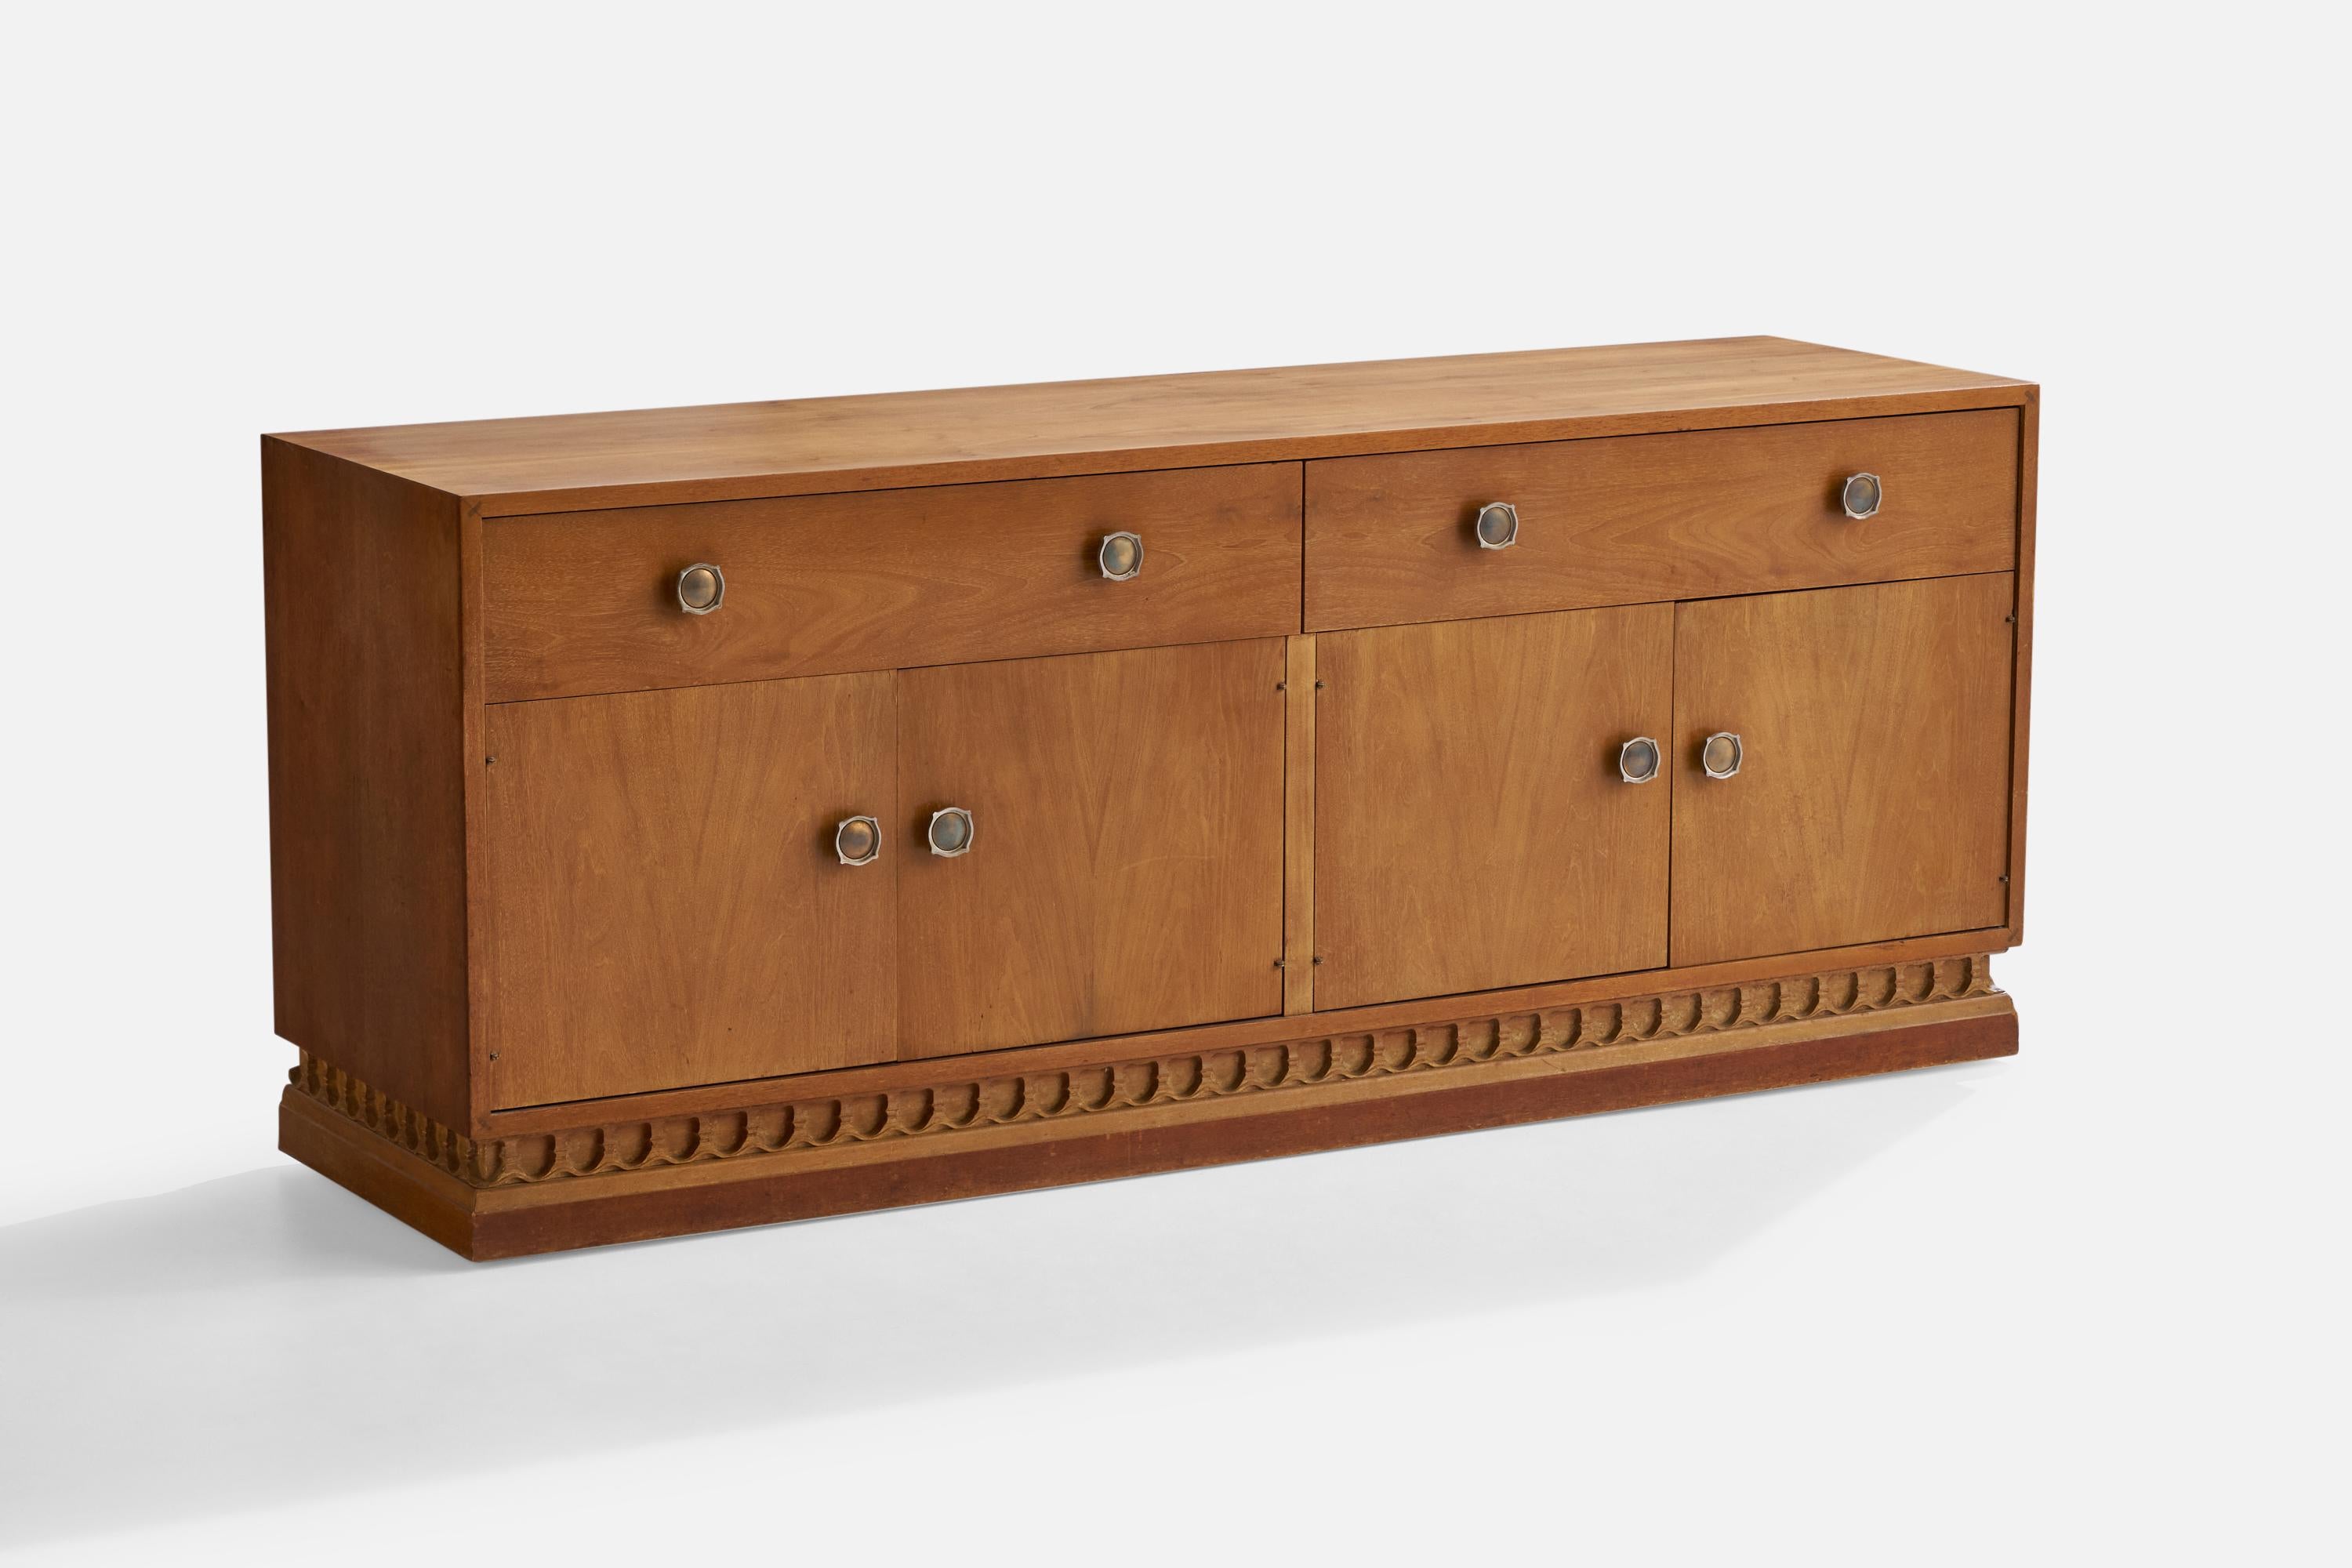 An oak and brass cabinet designed by John Van Koert and produced by Drexel, USA, 1950s.